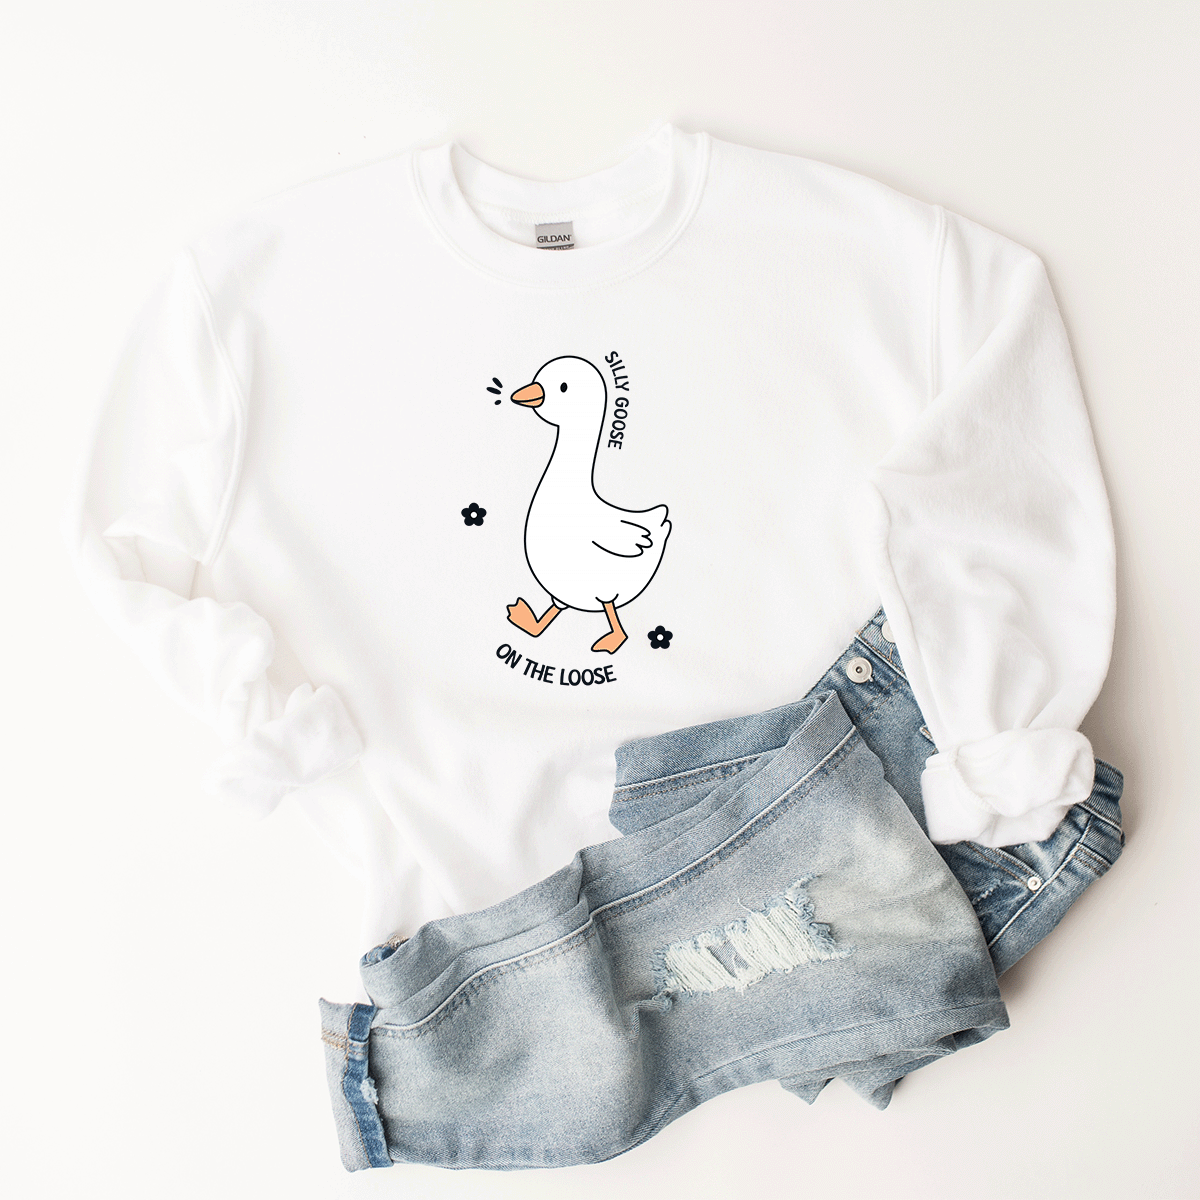 Silly Goose On The Loose (Flowers) - Sweatshirt